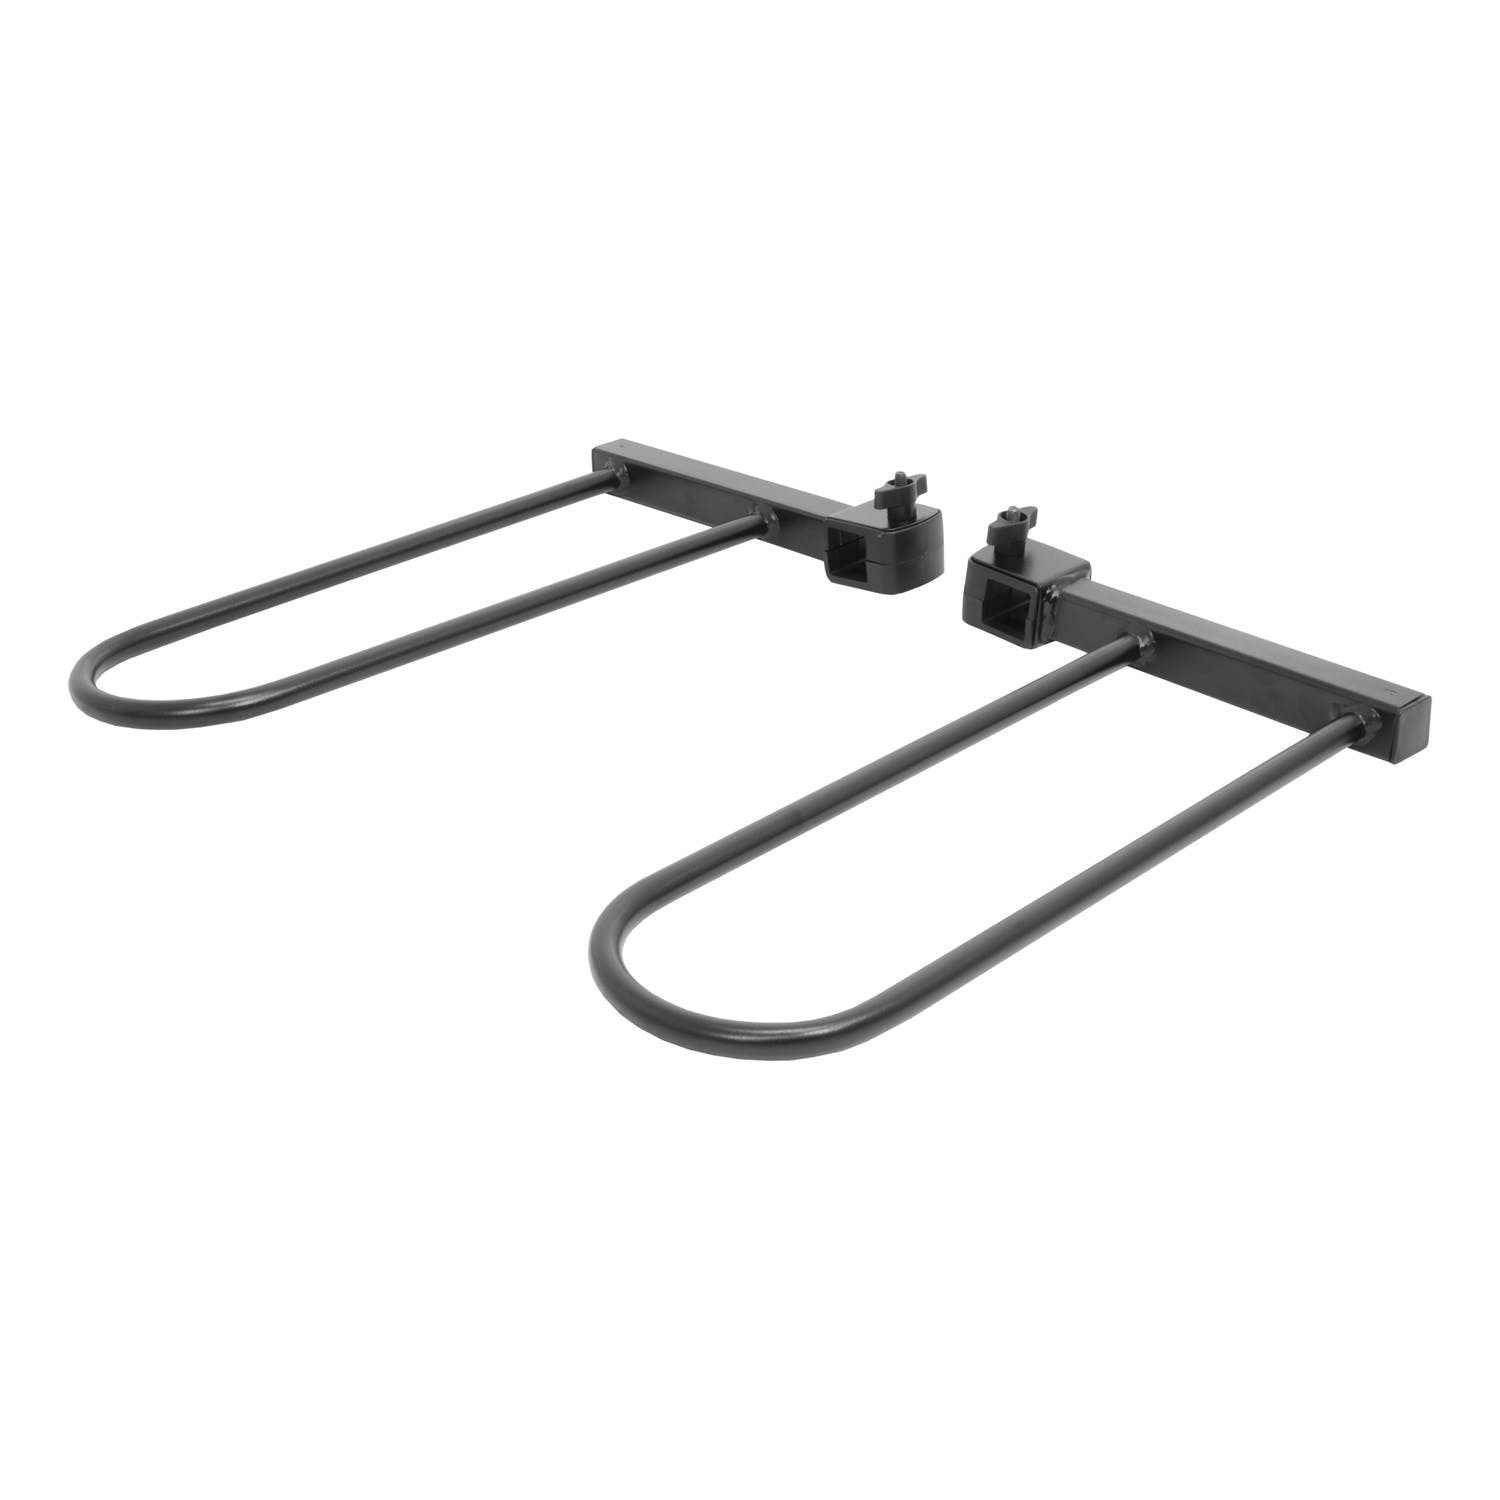 CURT 18091 Tray-Style Bike Rack Cradles for Fat Tires (4-7/8 ID, 2-Pack)